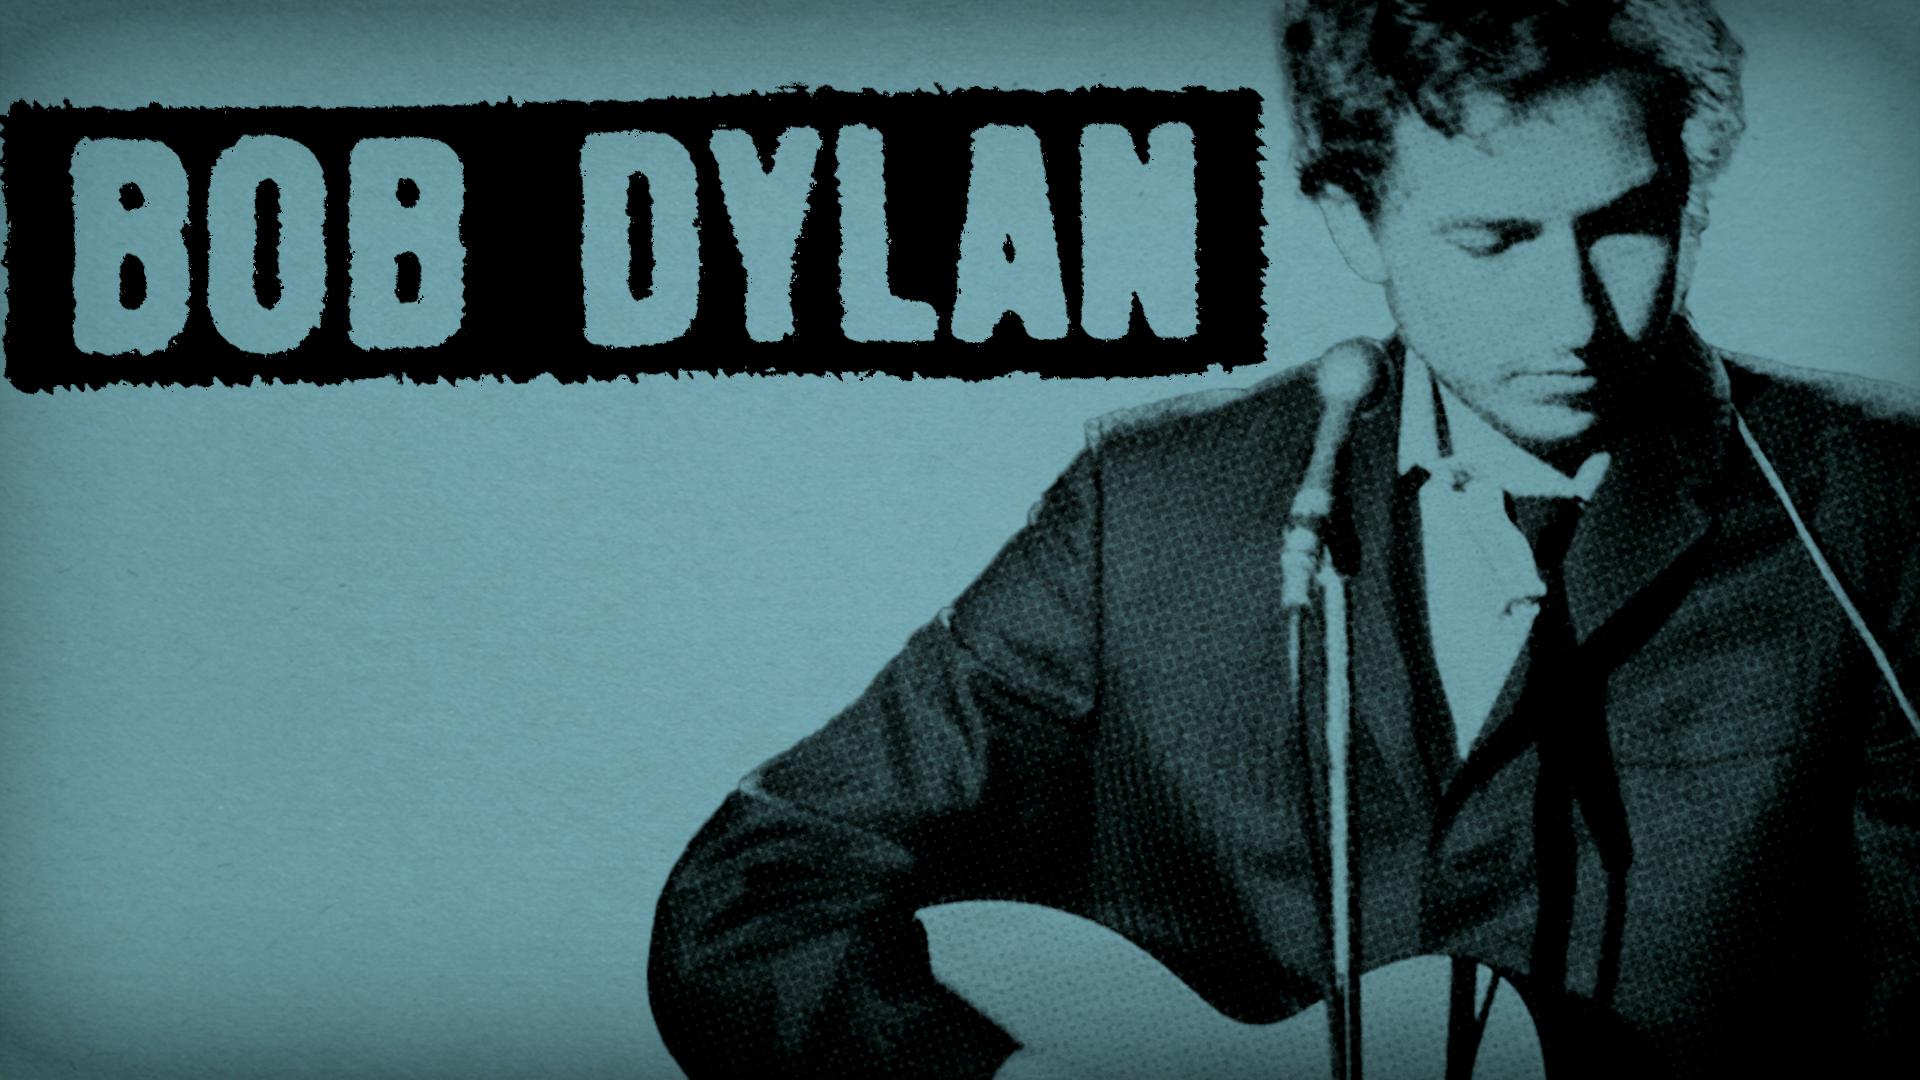 Bob Dylan - I Pity the Poor Immigrant (Take 4 - Official Audio)